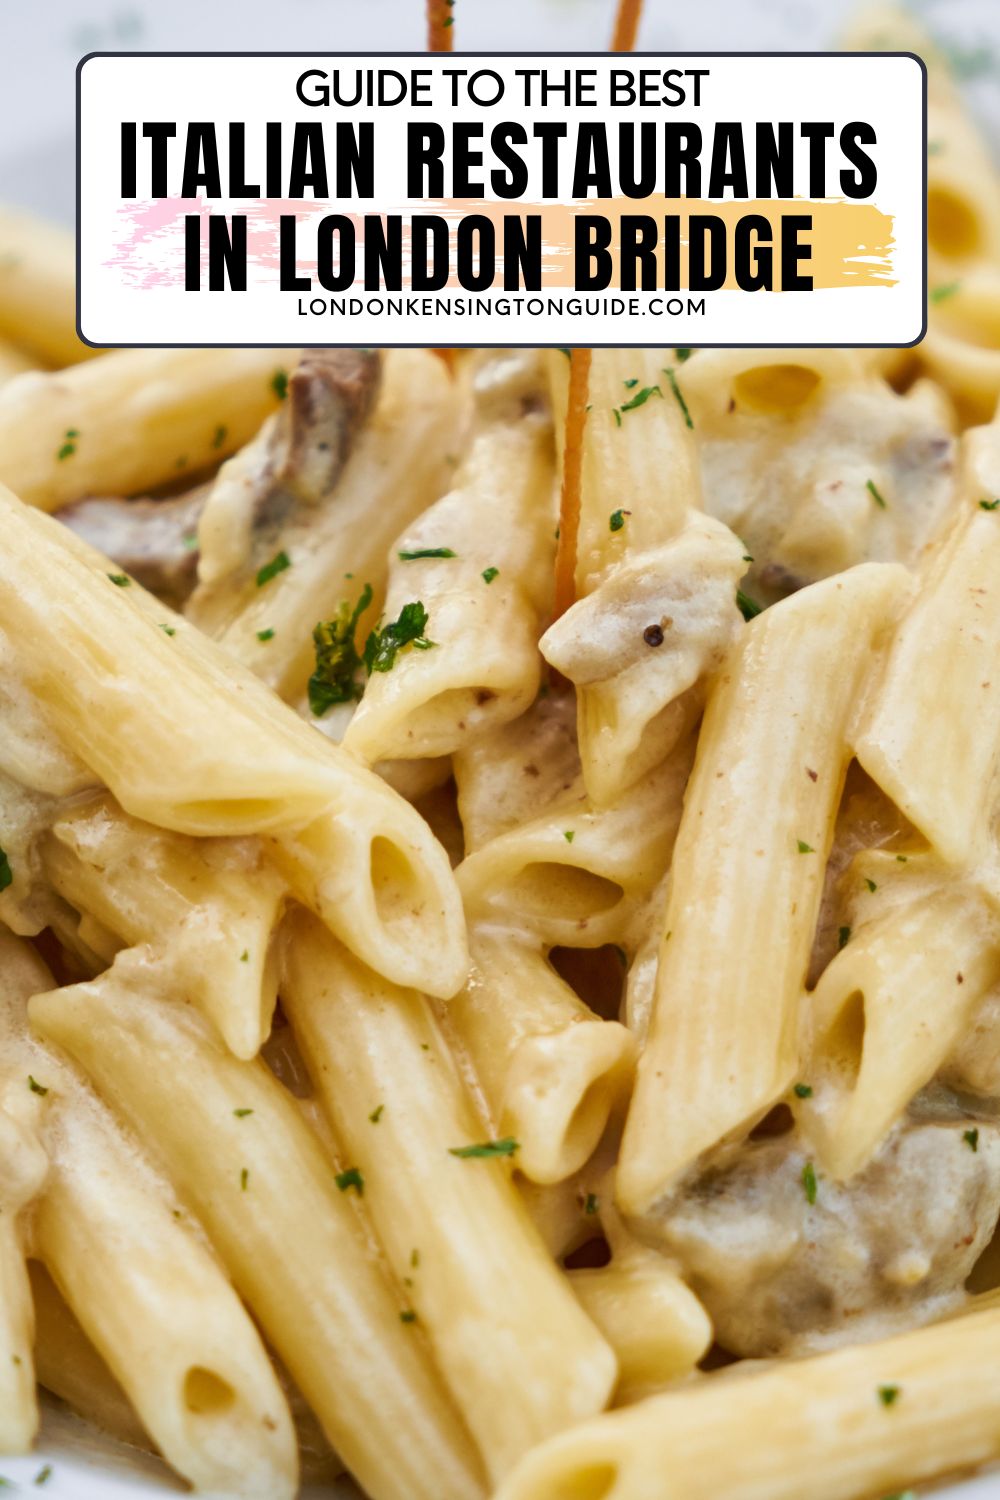 Guide to the best Italian restaurants in London Bridge and Tower Bridge. Whether you are looking for a pasta place, Pizzeria or just want food Italian food. We have you covered! | vapiano london bridge | azzurro london bridge | italian restaurants near london bridge | pasta restaurant london bridge | italian near london bridge | bella italia london bridge | ask italian london bridge | cafe murano london bridge | pasta place london bridge | italian near borough market